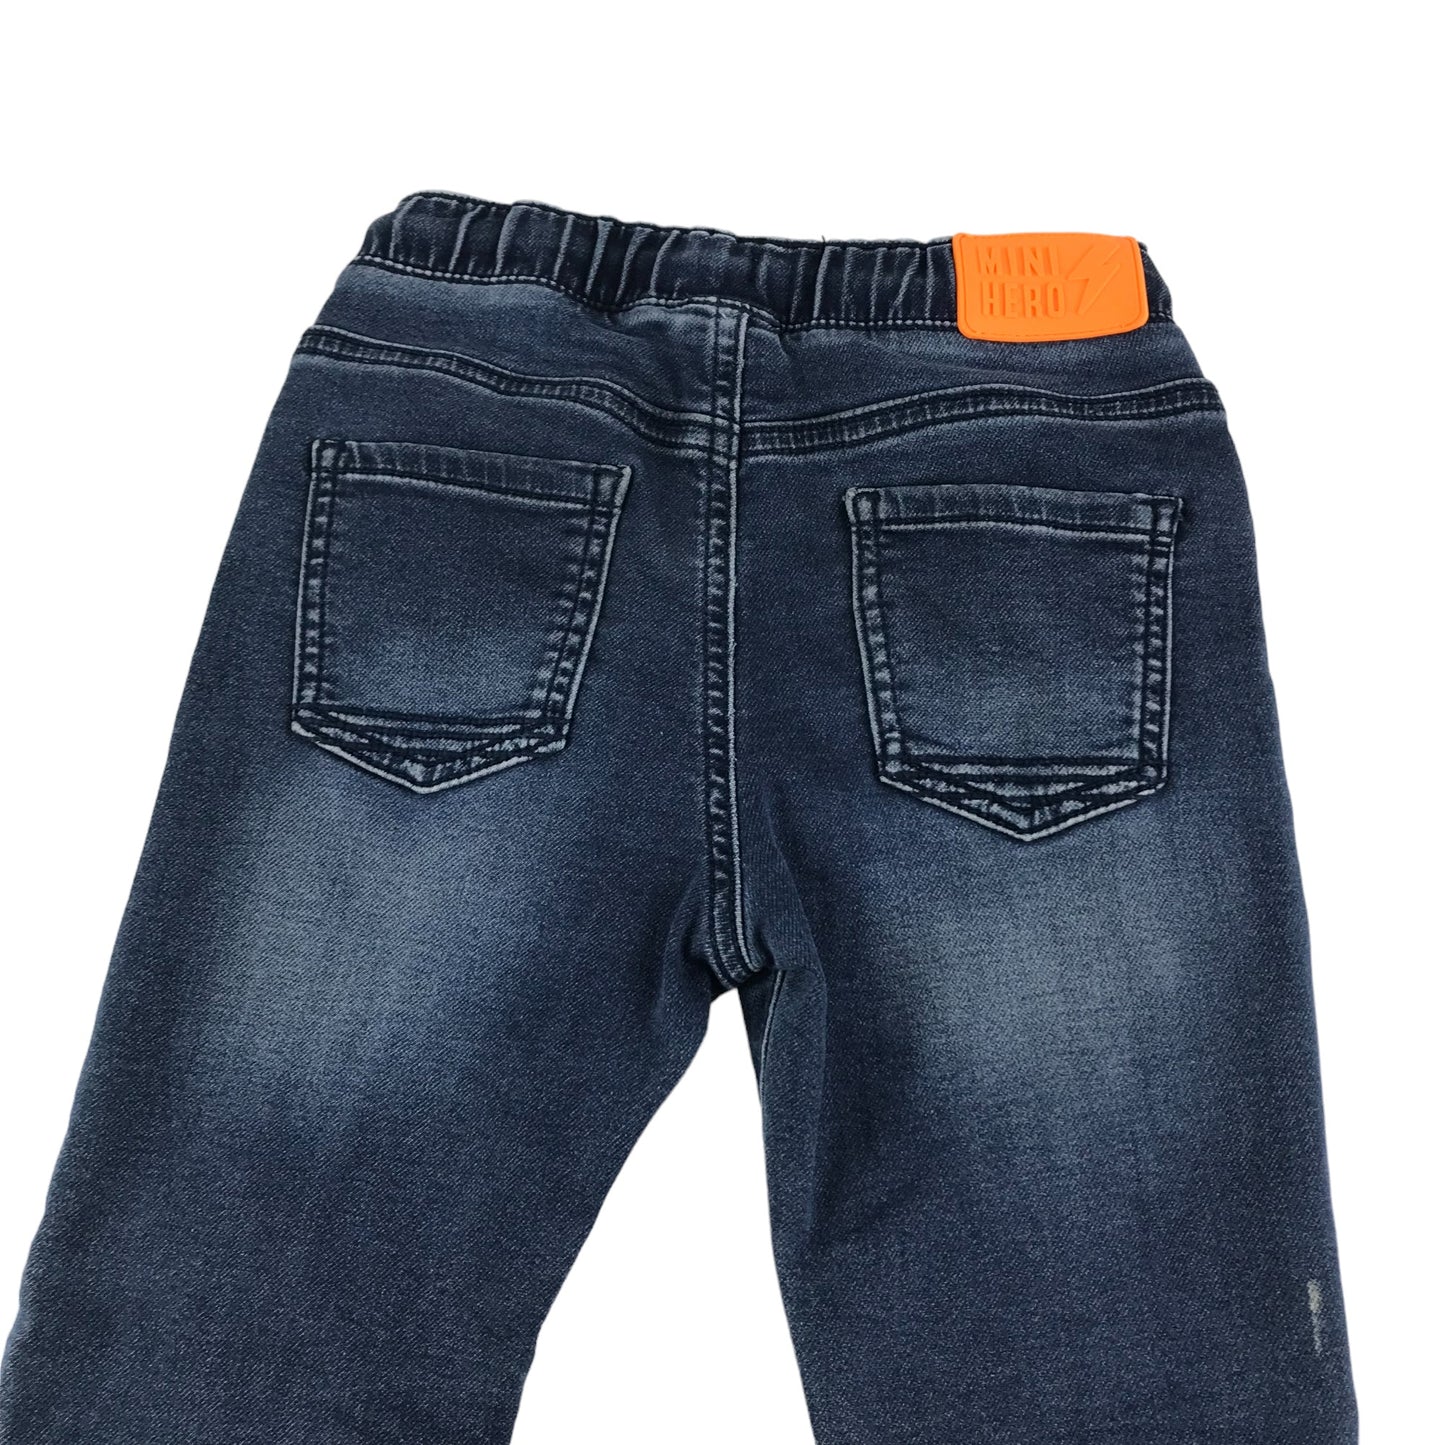 F&F Jeans Age 6 Blue Super Cool Stretchy Pull Up Style